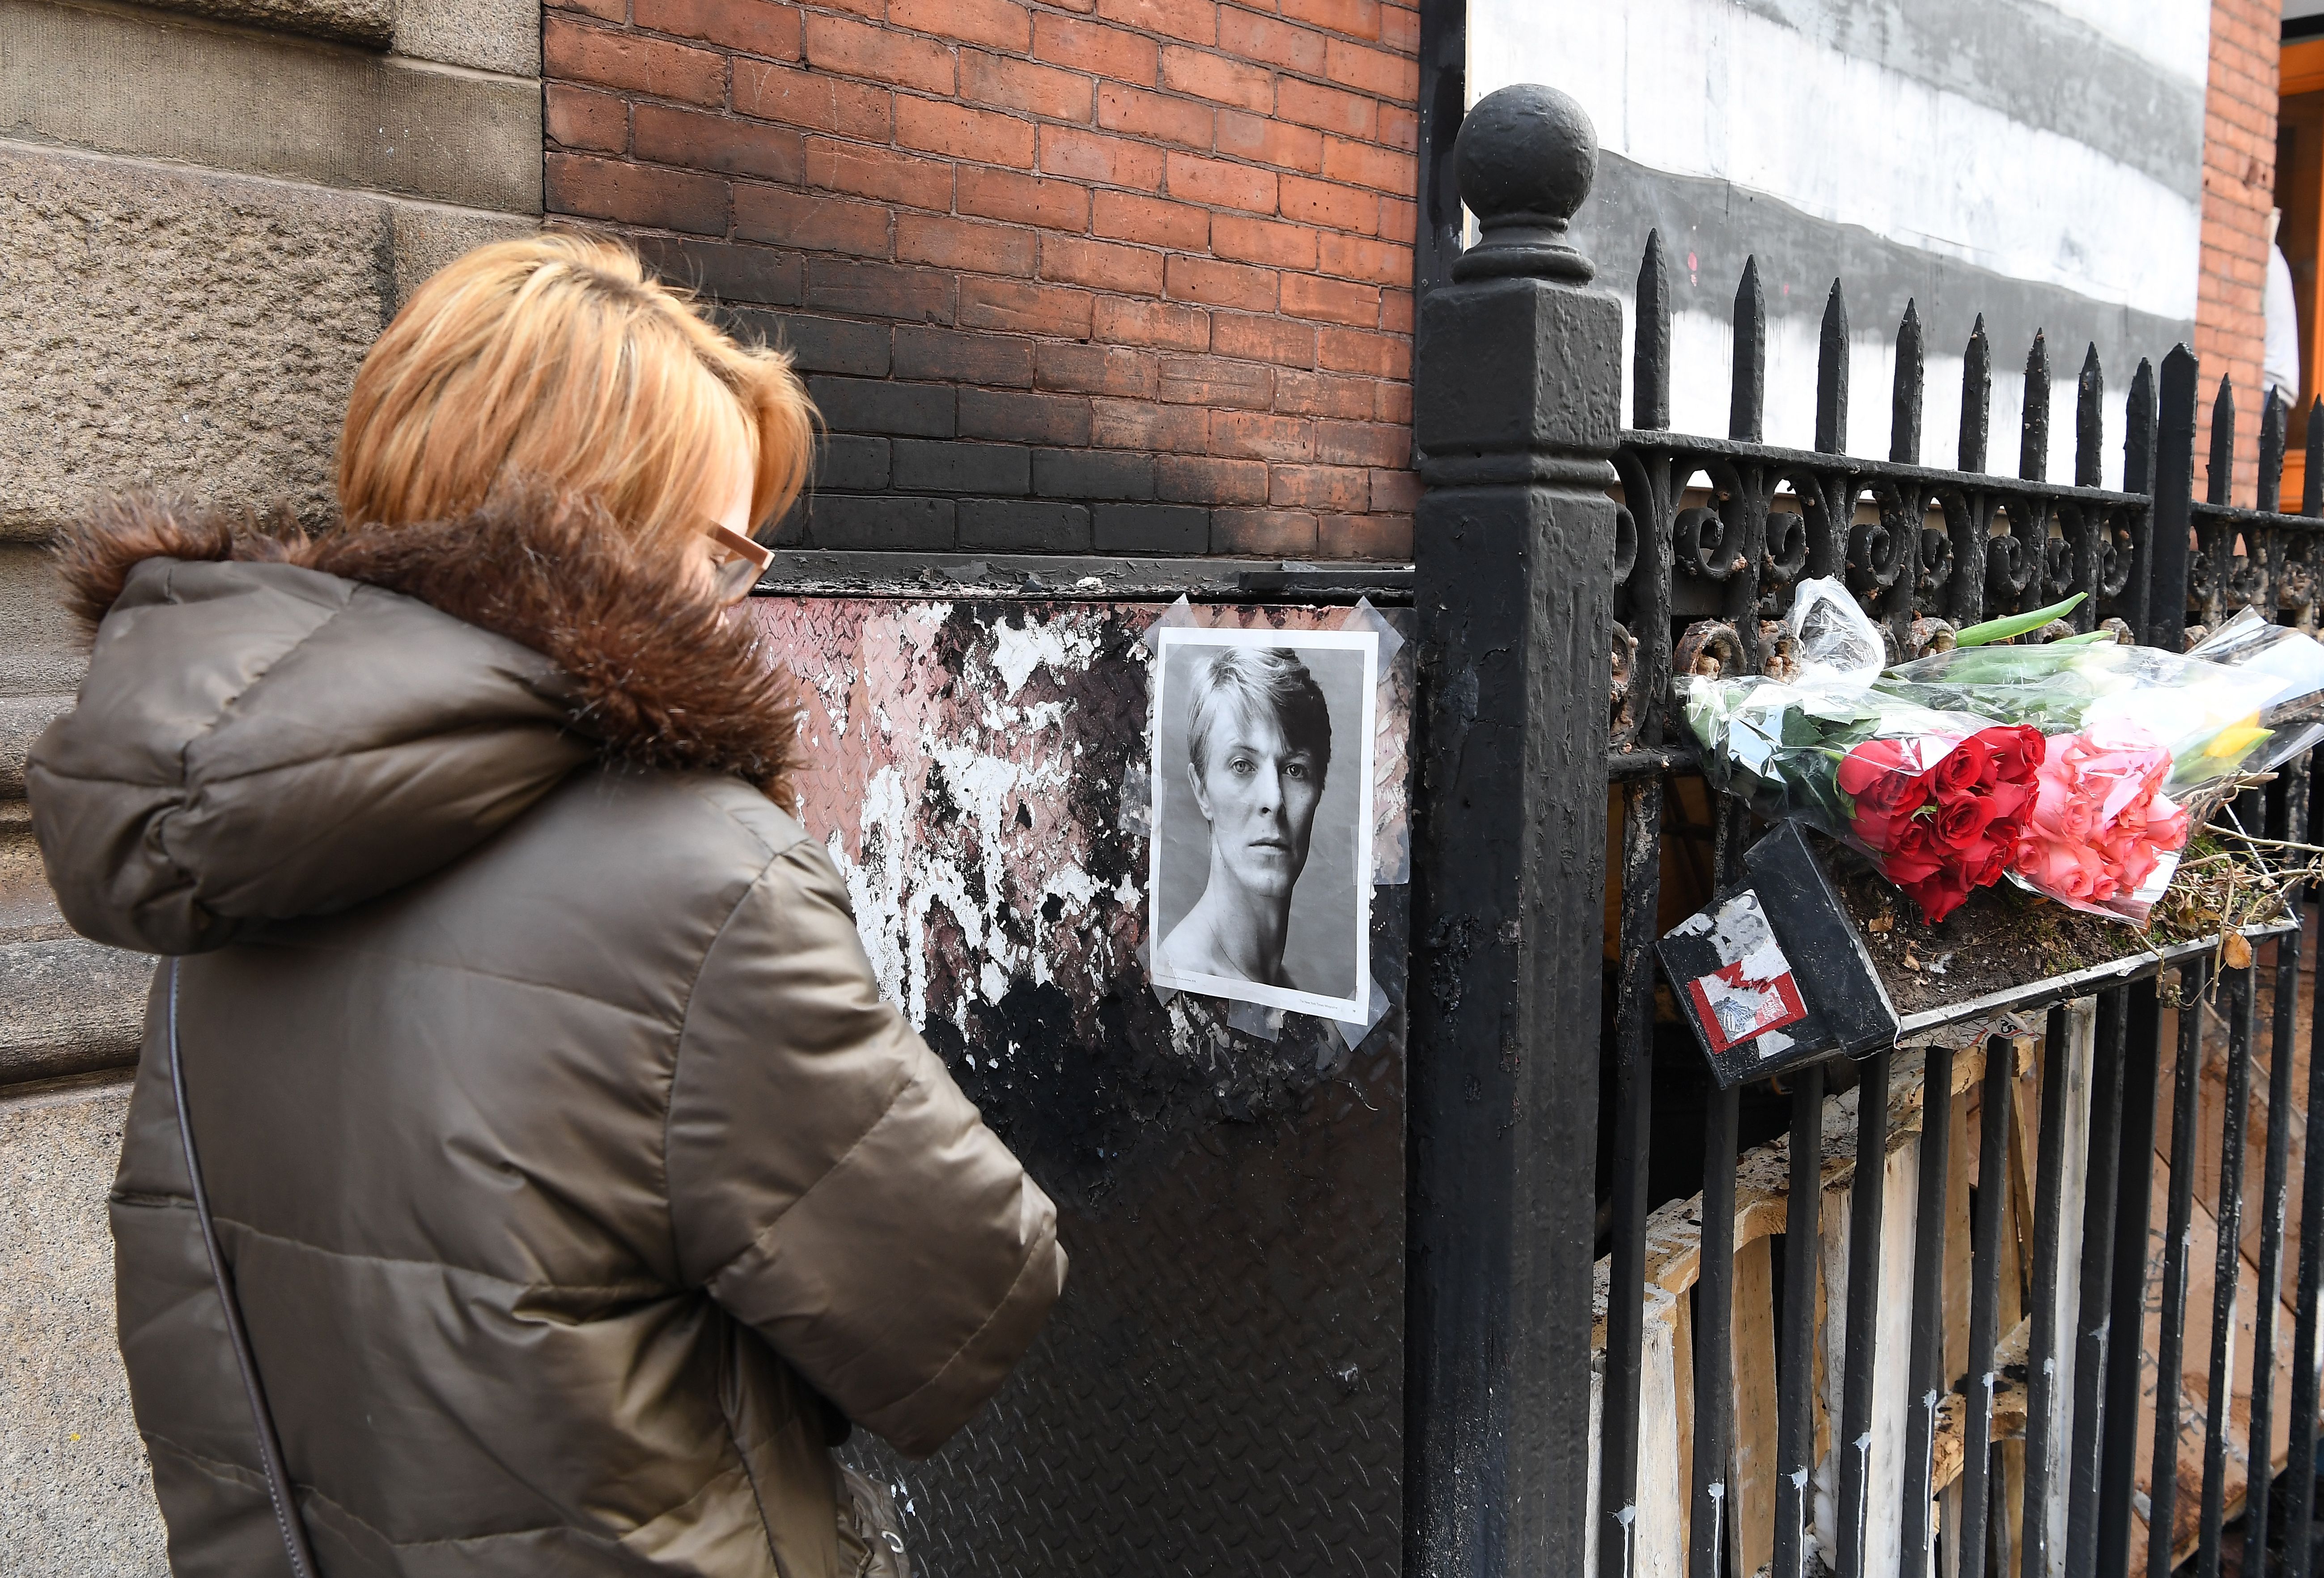 A woman pauses outside David Bowie’s SoHo apartment building on 10 January 2017, the first anniversary of the music icon’s death.